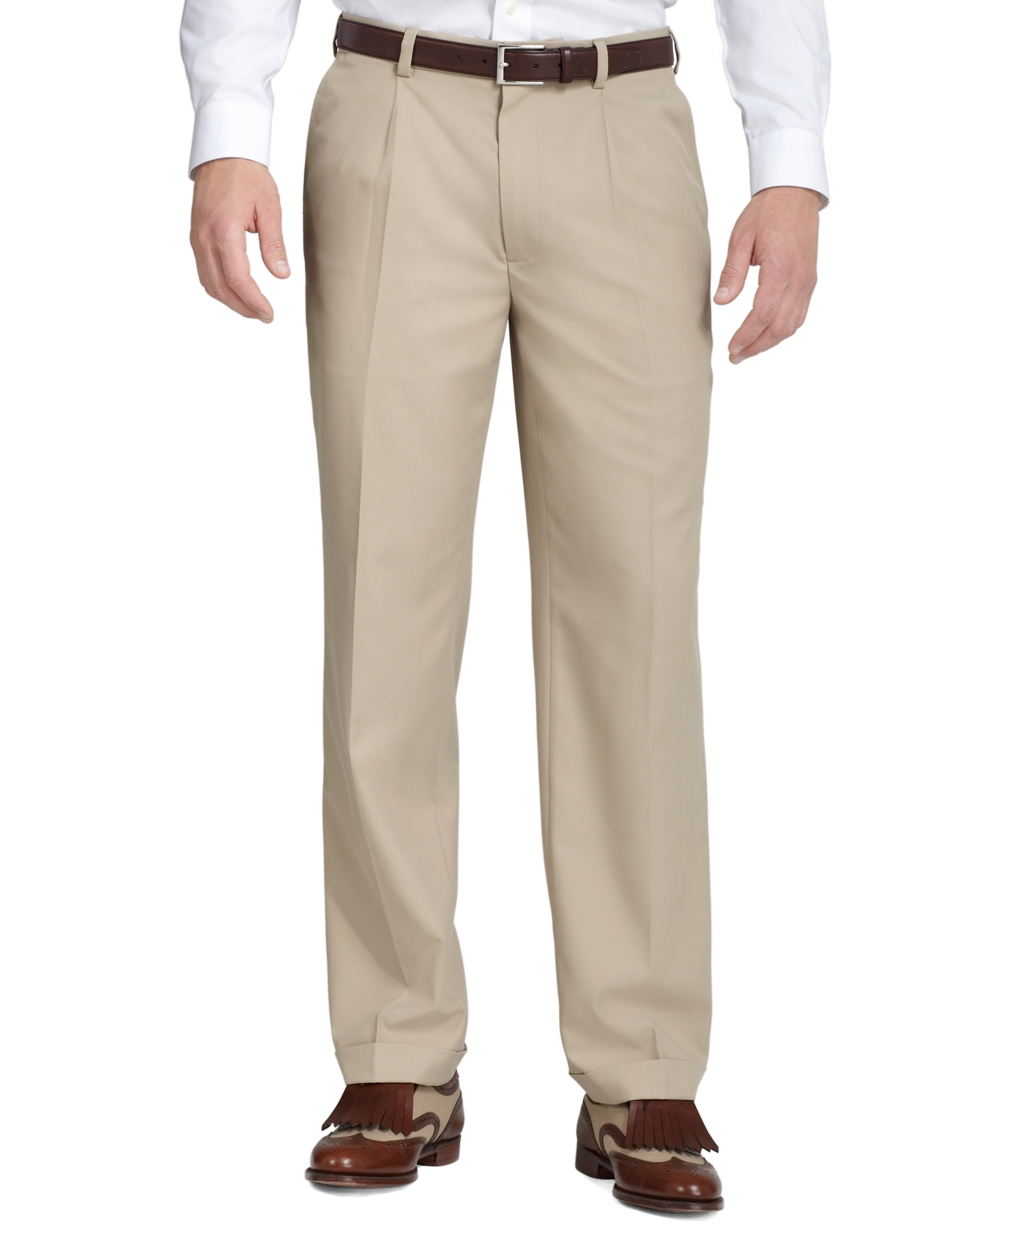 Lyst - Brooks Brothers St Andrews Links Pleated Golf Pants in Natural ...